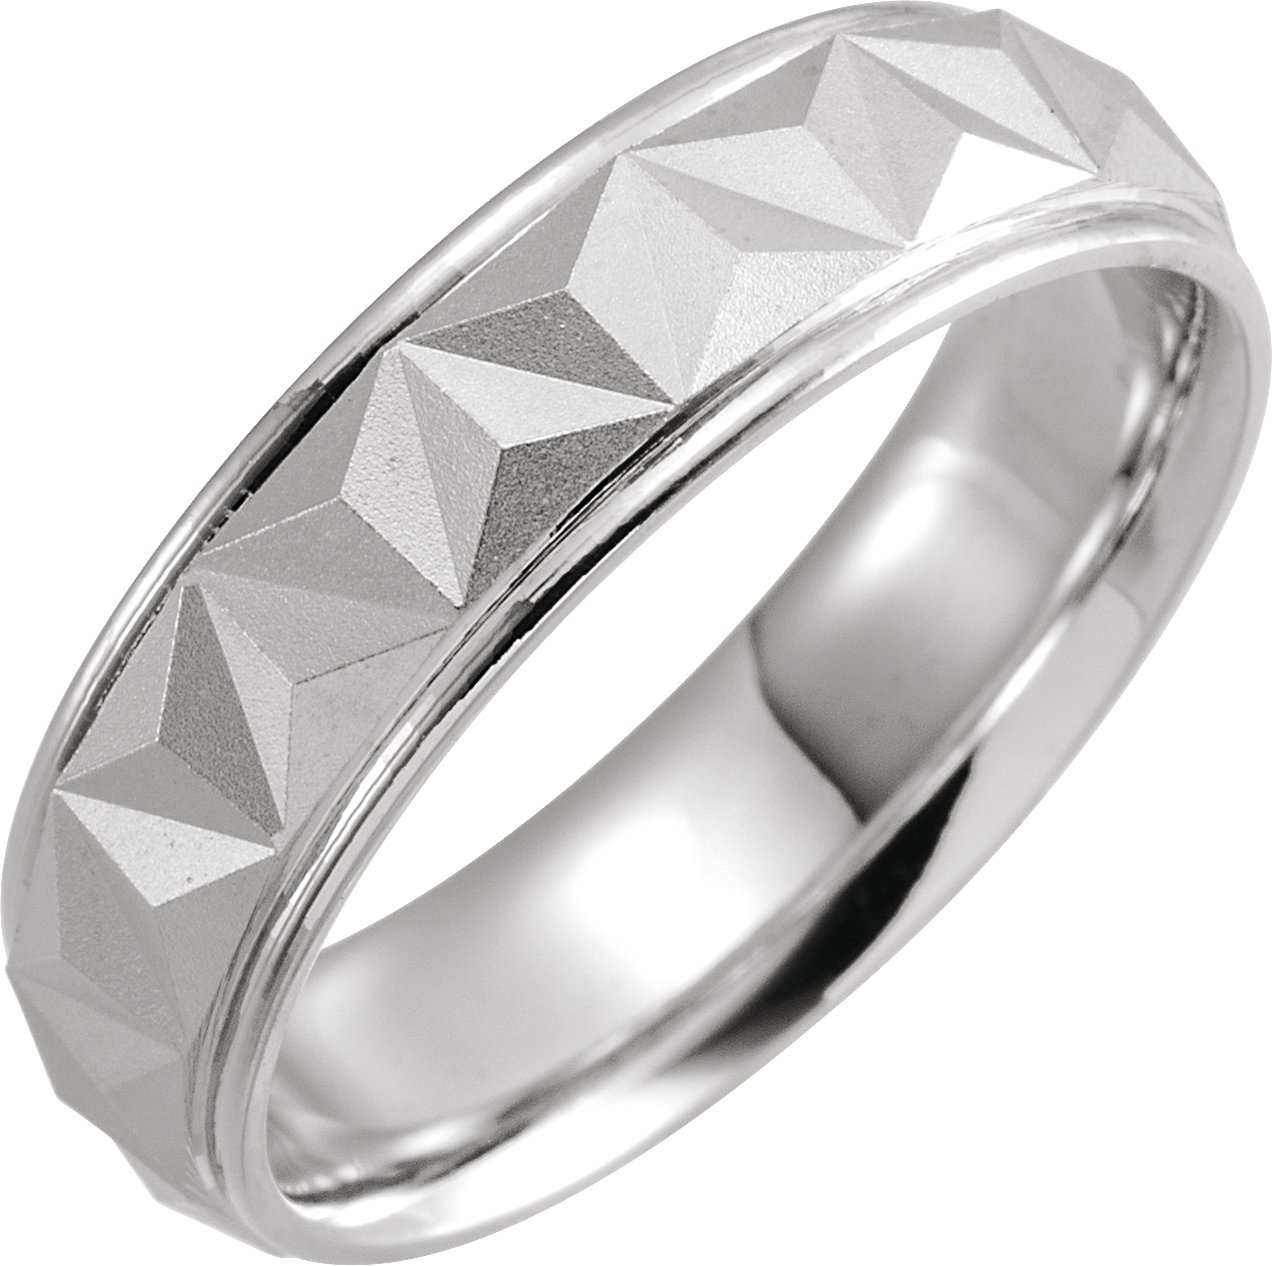 Continuum Sterling Silver 6 mm Geometric Band with Matte/Polished Finish Size 10.5